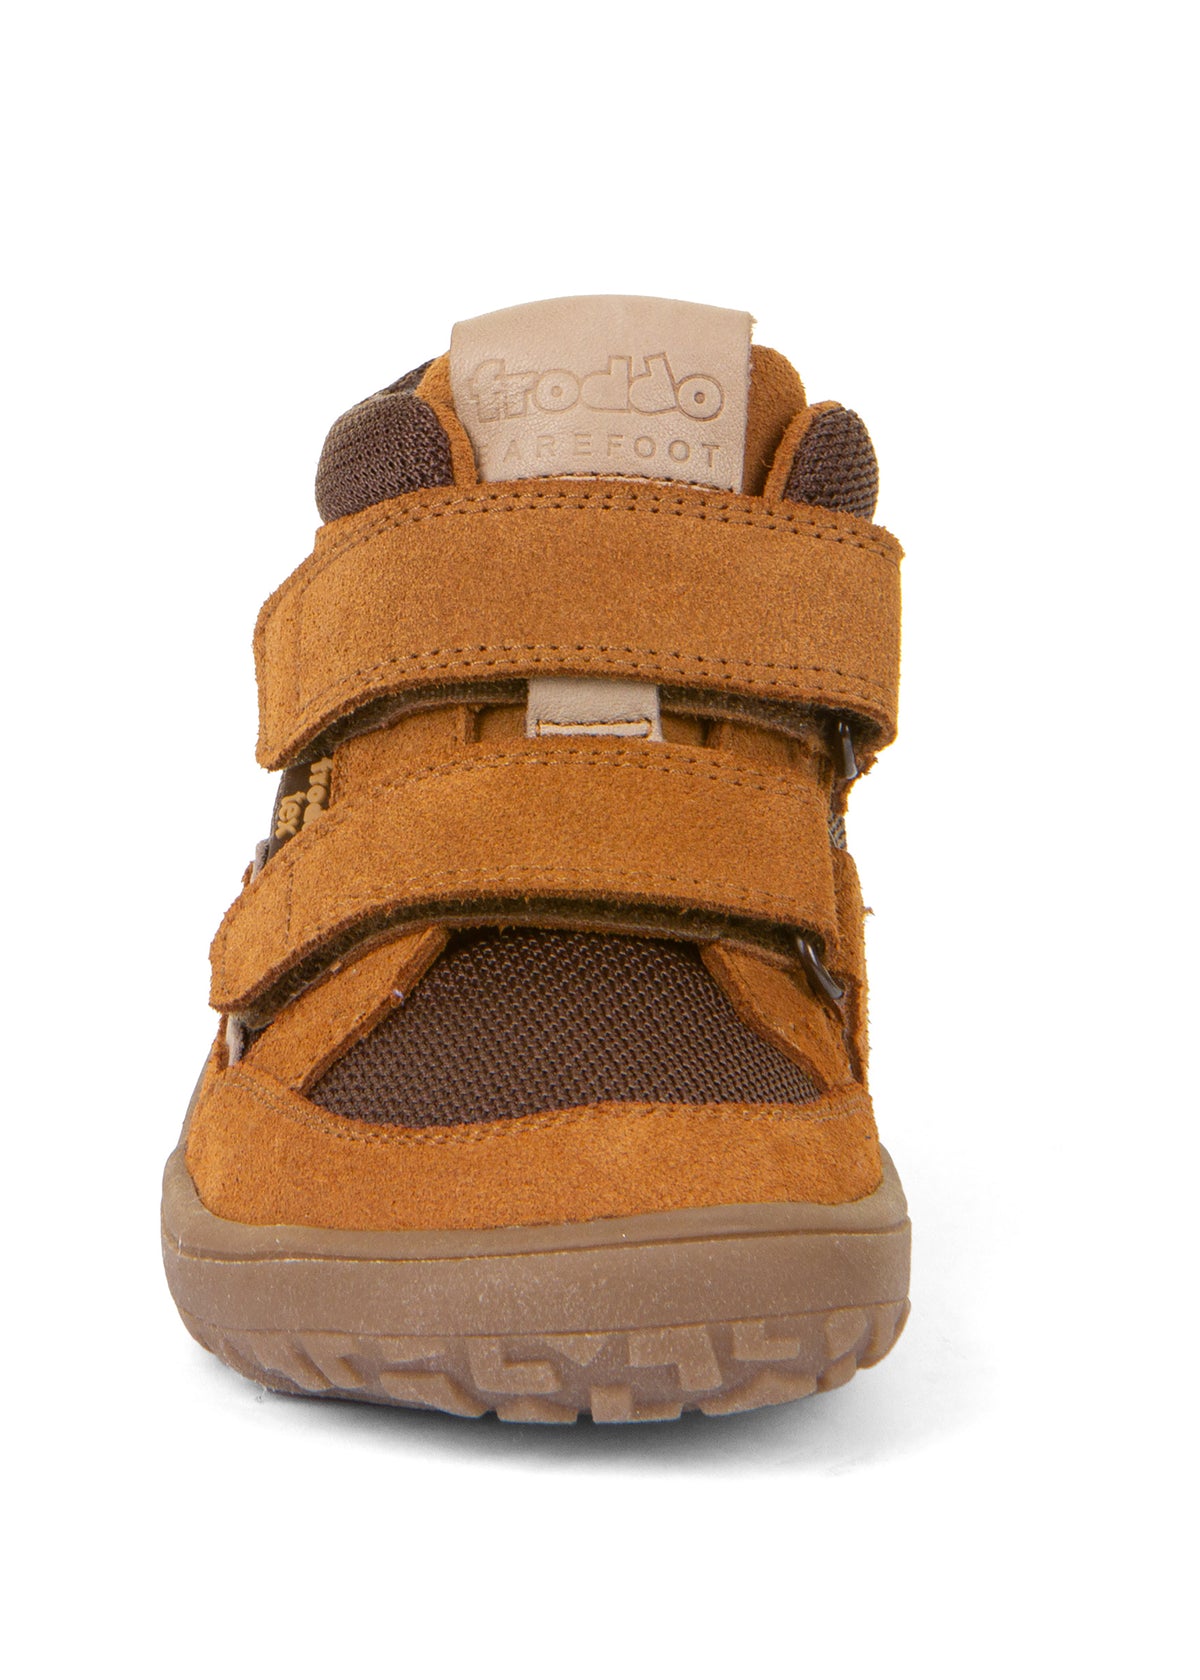 Barefoot sneakers with handles - mid-season shoes, Autumn-TEX, brown